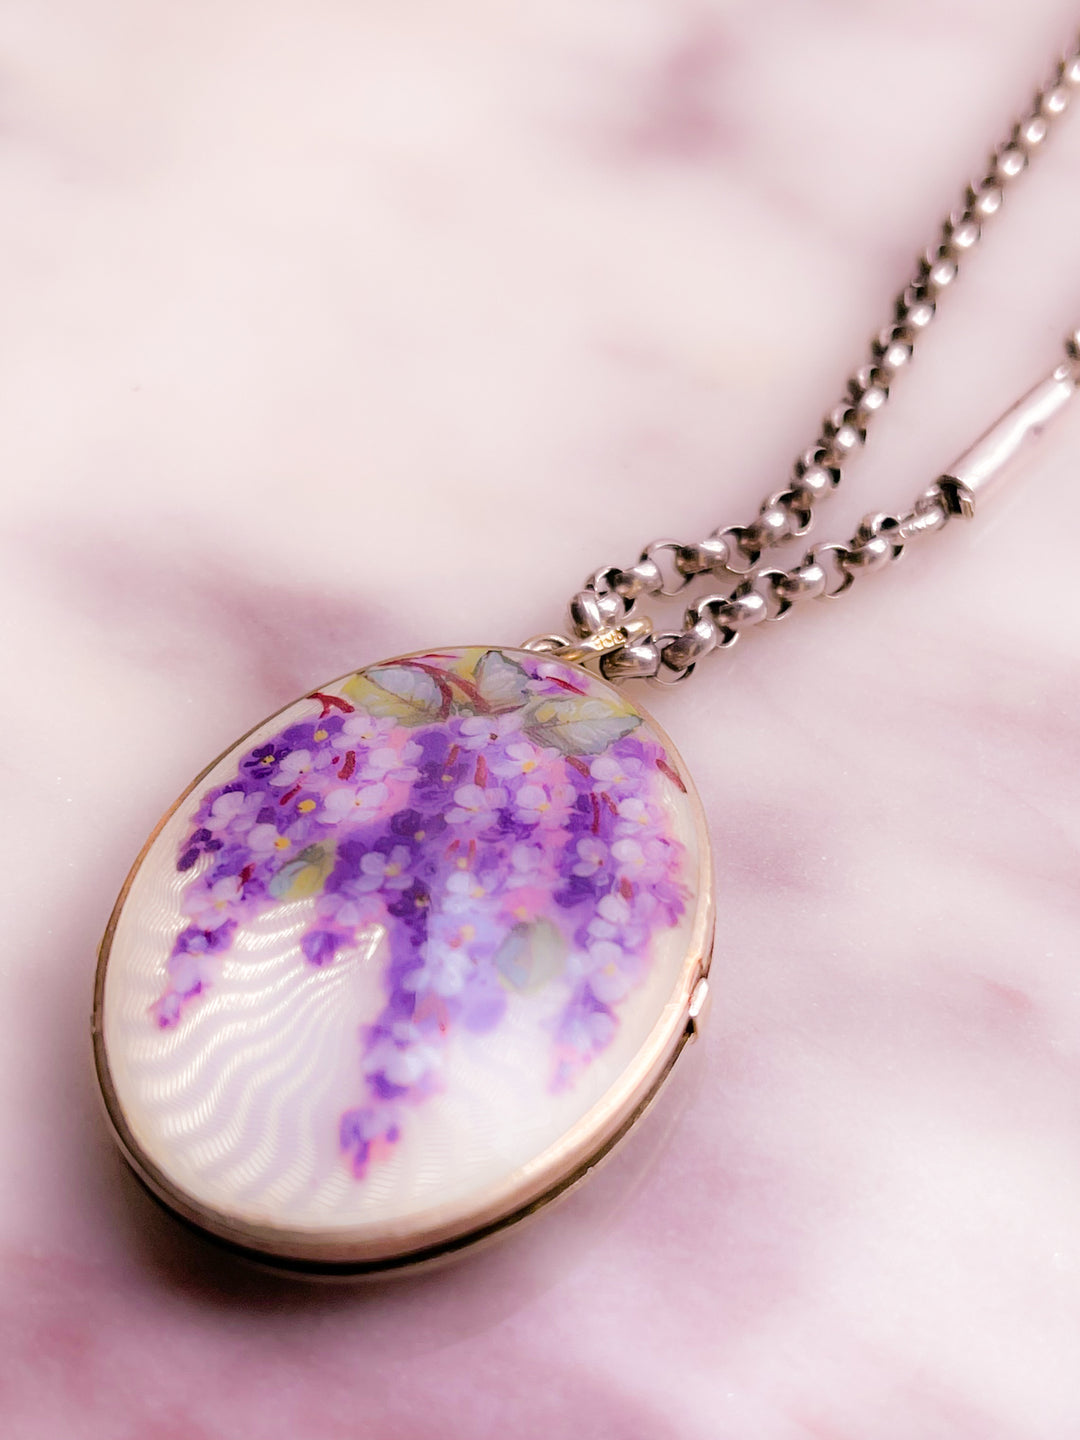 Edwardian Enamel and Sterling Silver Locket Depicting Wisteria Blooms on Verdant Vine *include purple and 'wheat' ribbon*